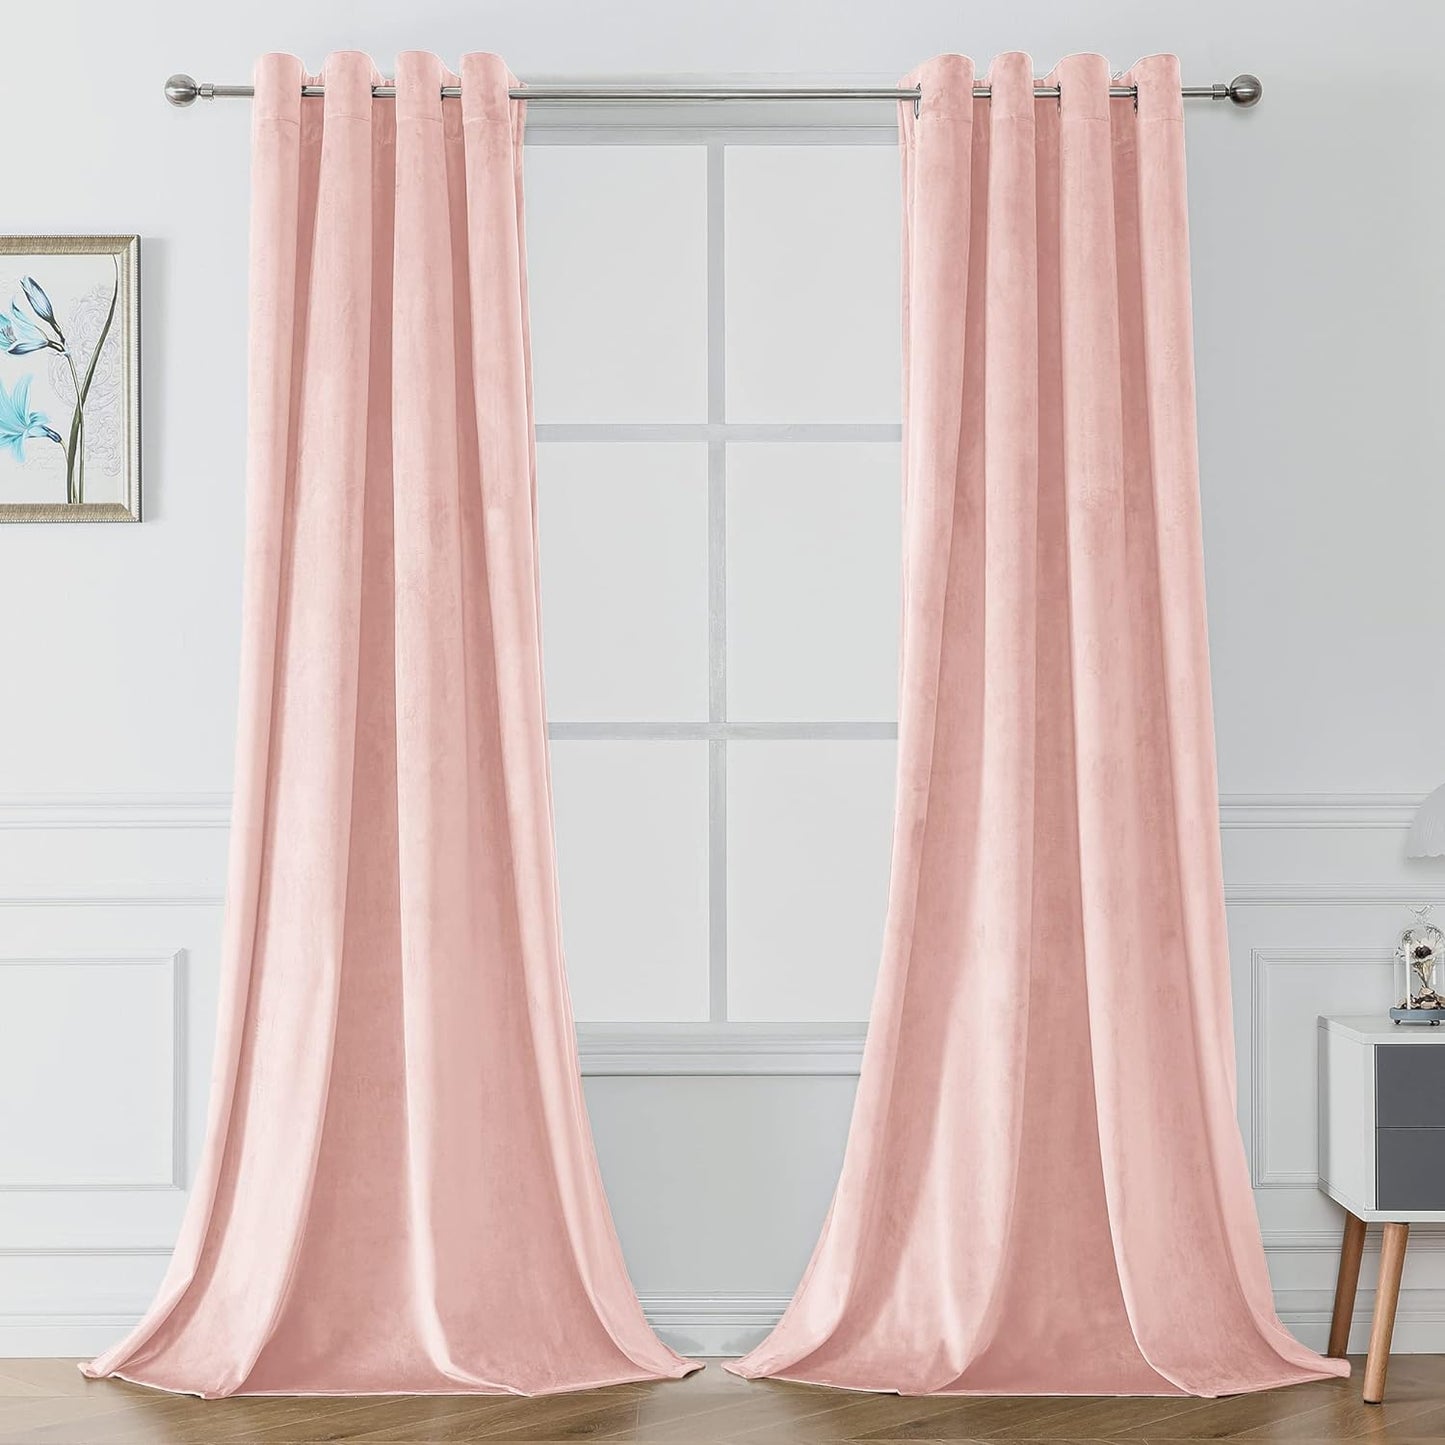 Victree Velvet Curtains for Bedroom, Blackout Curtains 52 X 84 Inch Length - Room Darkening Sun Light Blocking Grommet Window Drapes for Living Room, 2 Panels, Navy  Victree Pink 52 X 108 Inches 